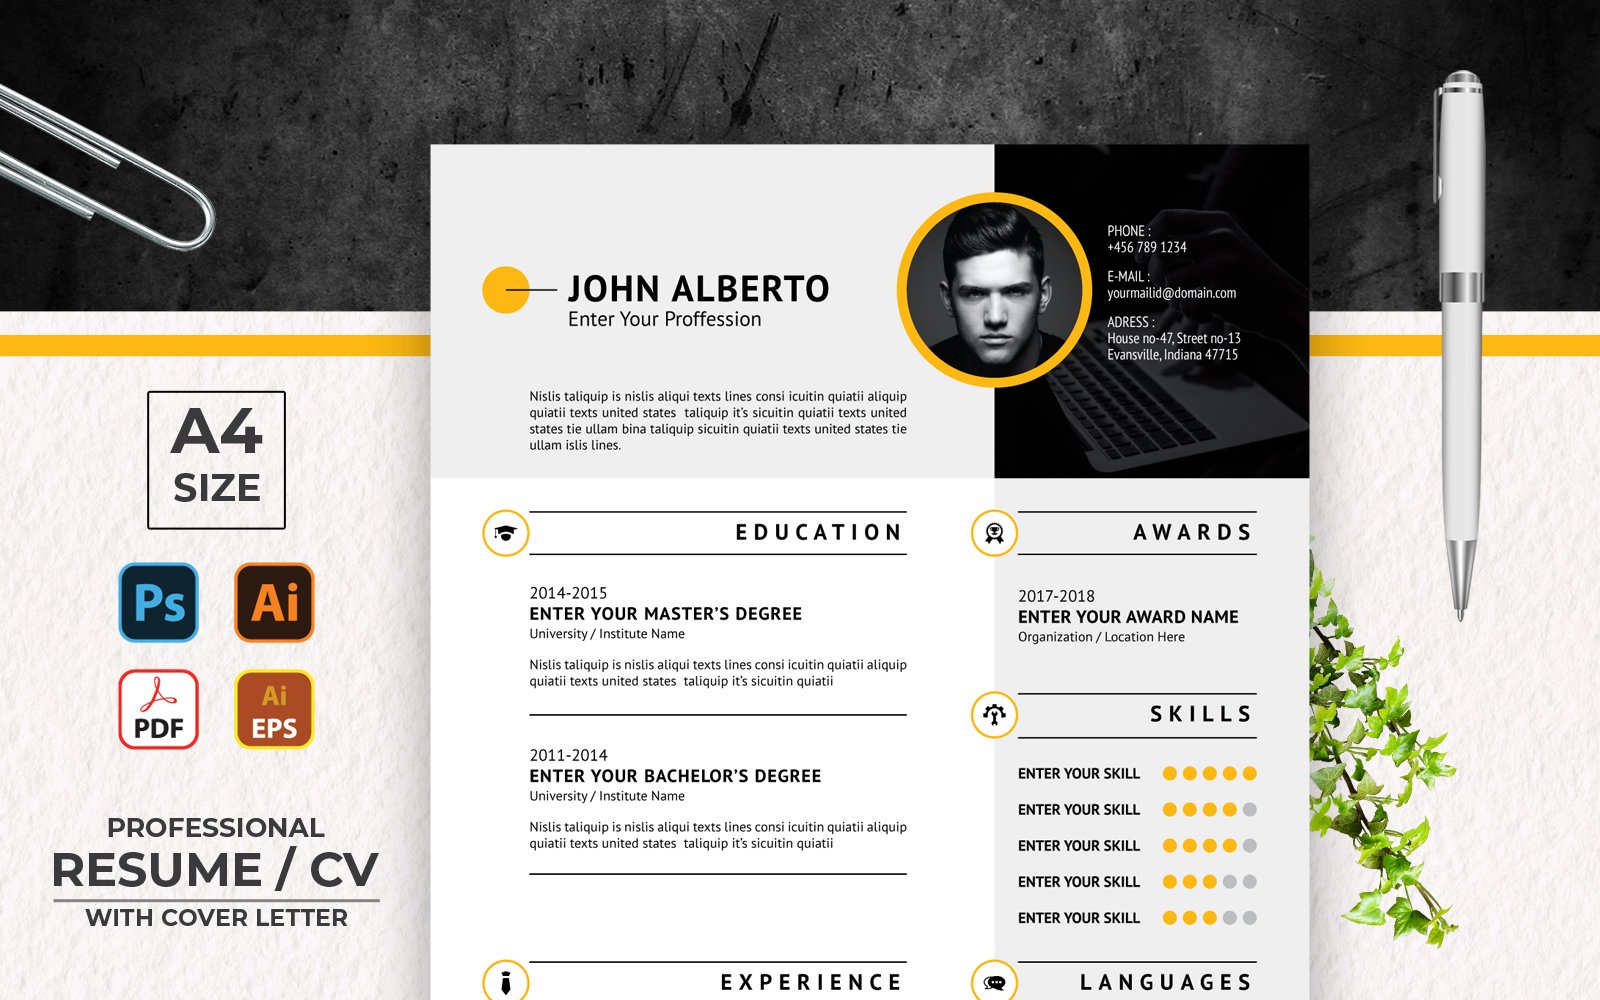 Template #148479 Resume Templates Webdesign Template - Logo template Preview